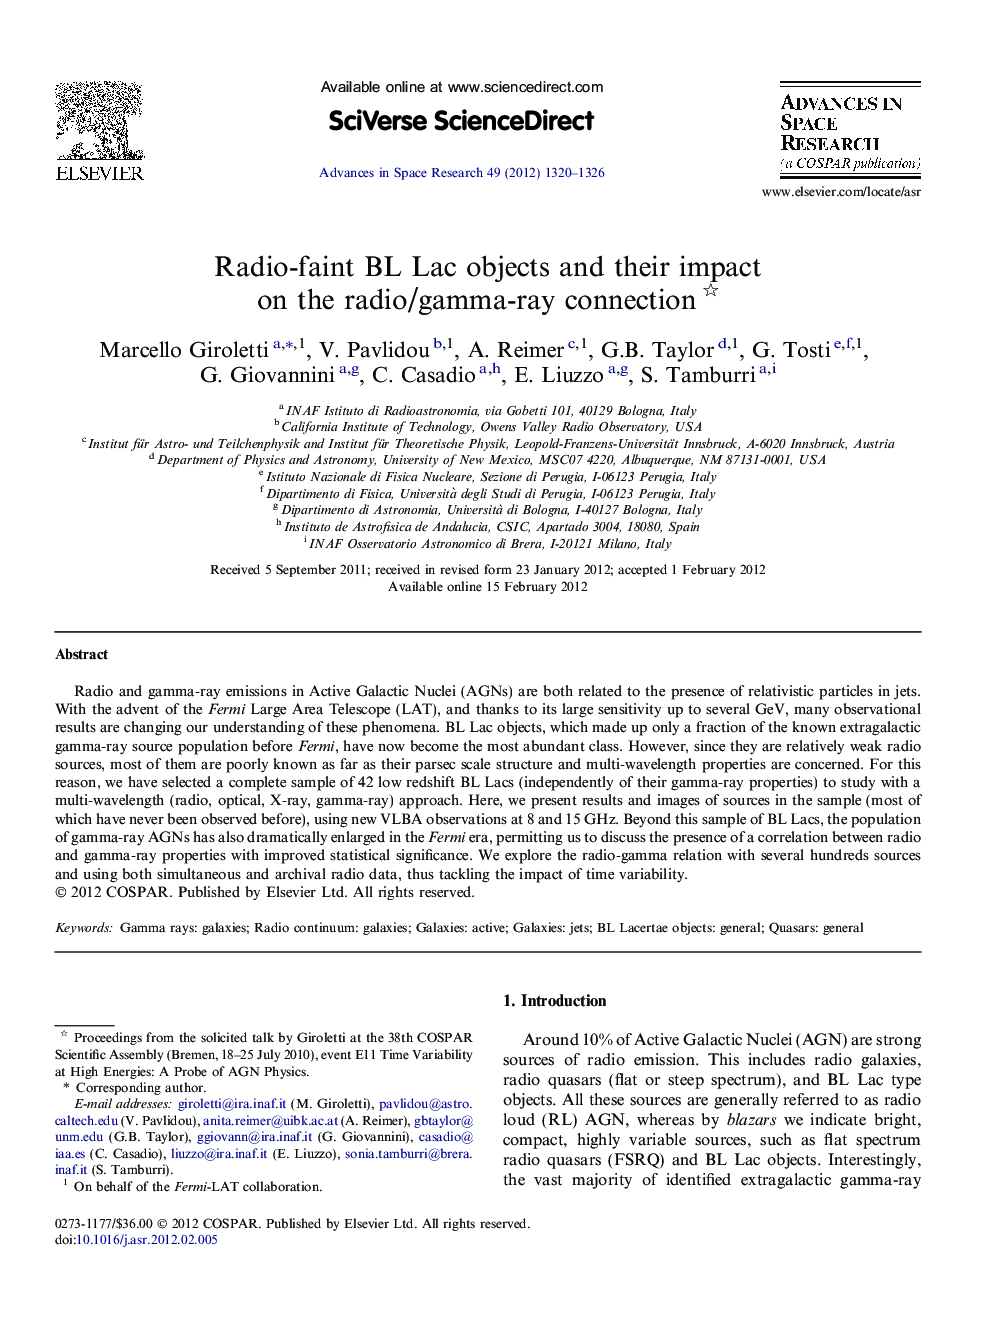 Radio-faint BL Lac objects and their impact on the radio/gamma-ray connection